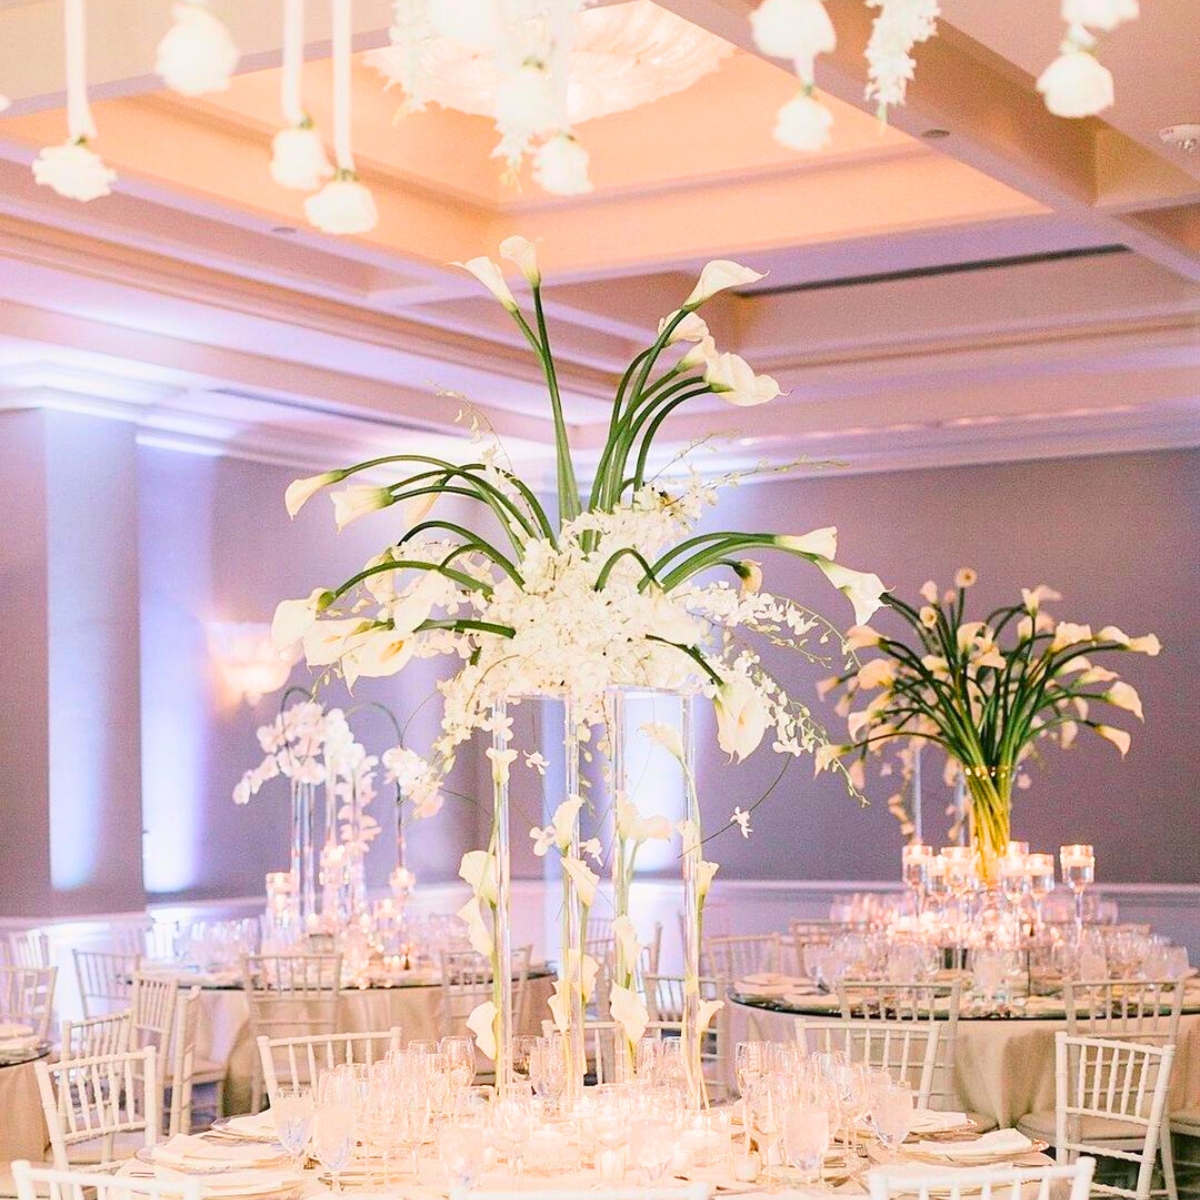 Tables with white calla lilies